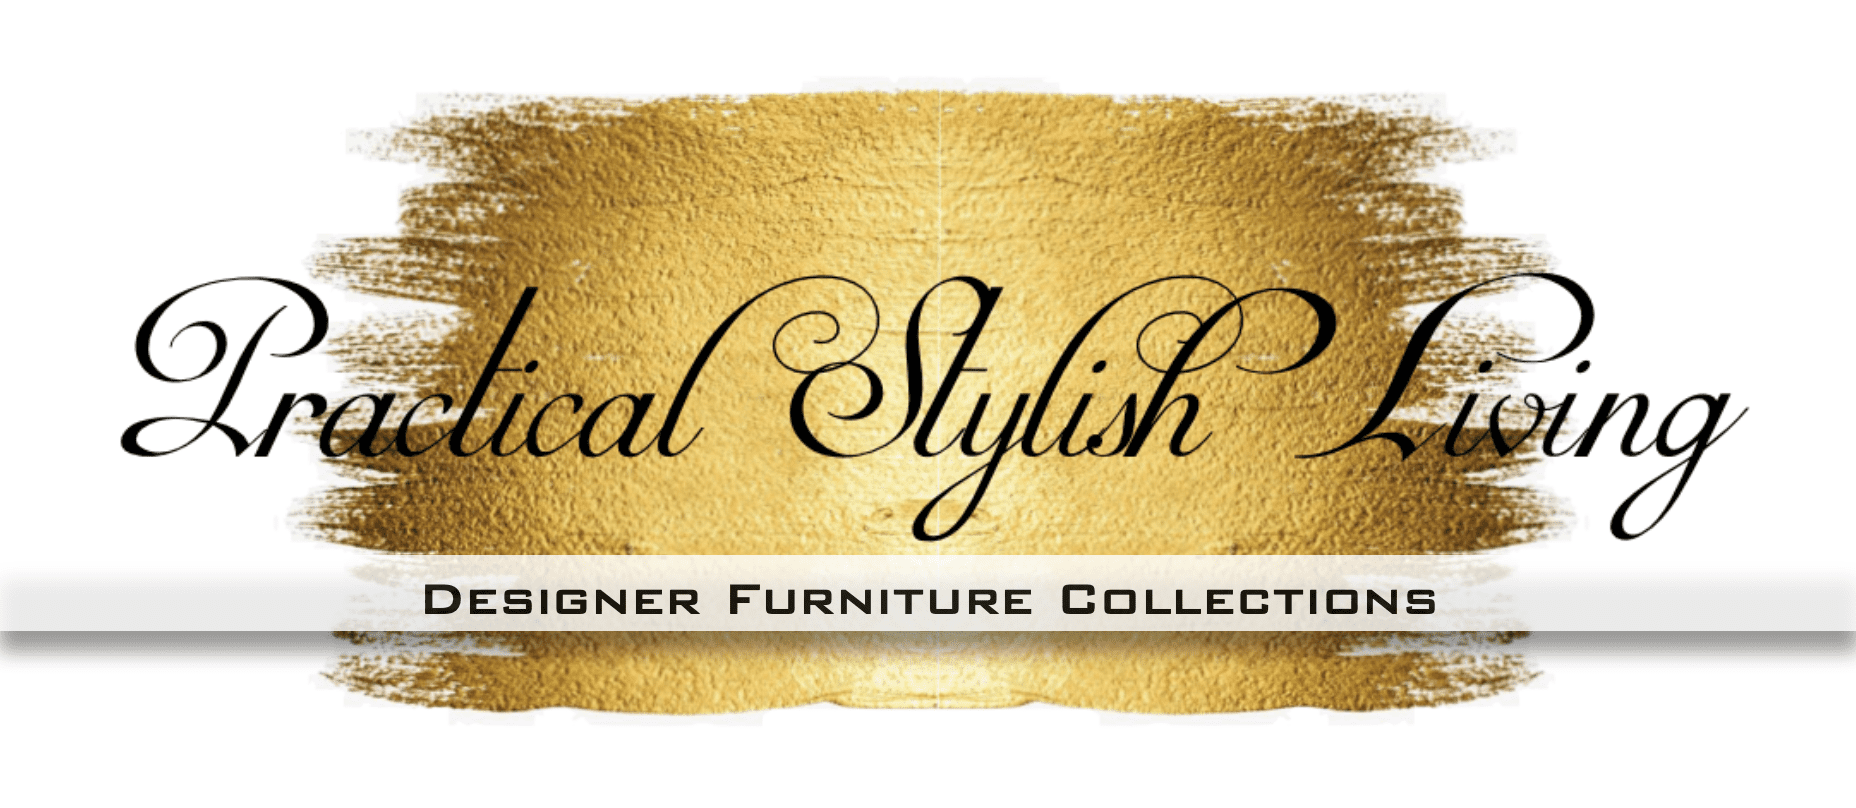 Practical Stylish Living favorite furniture collection